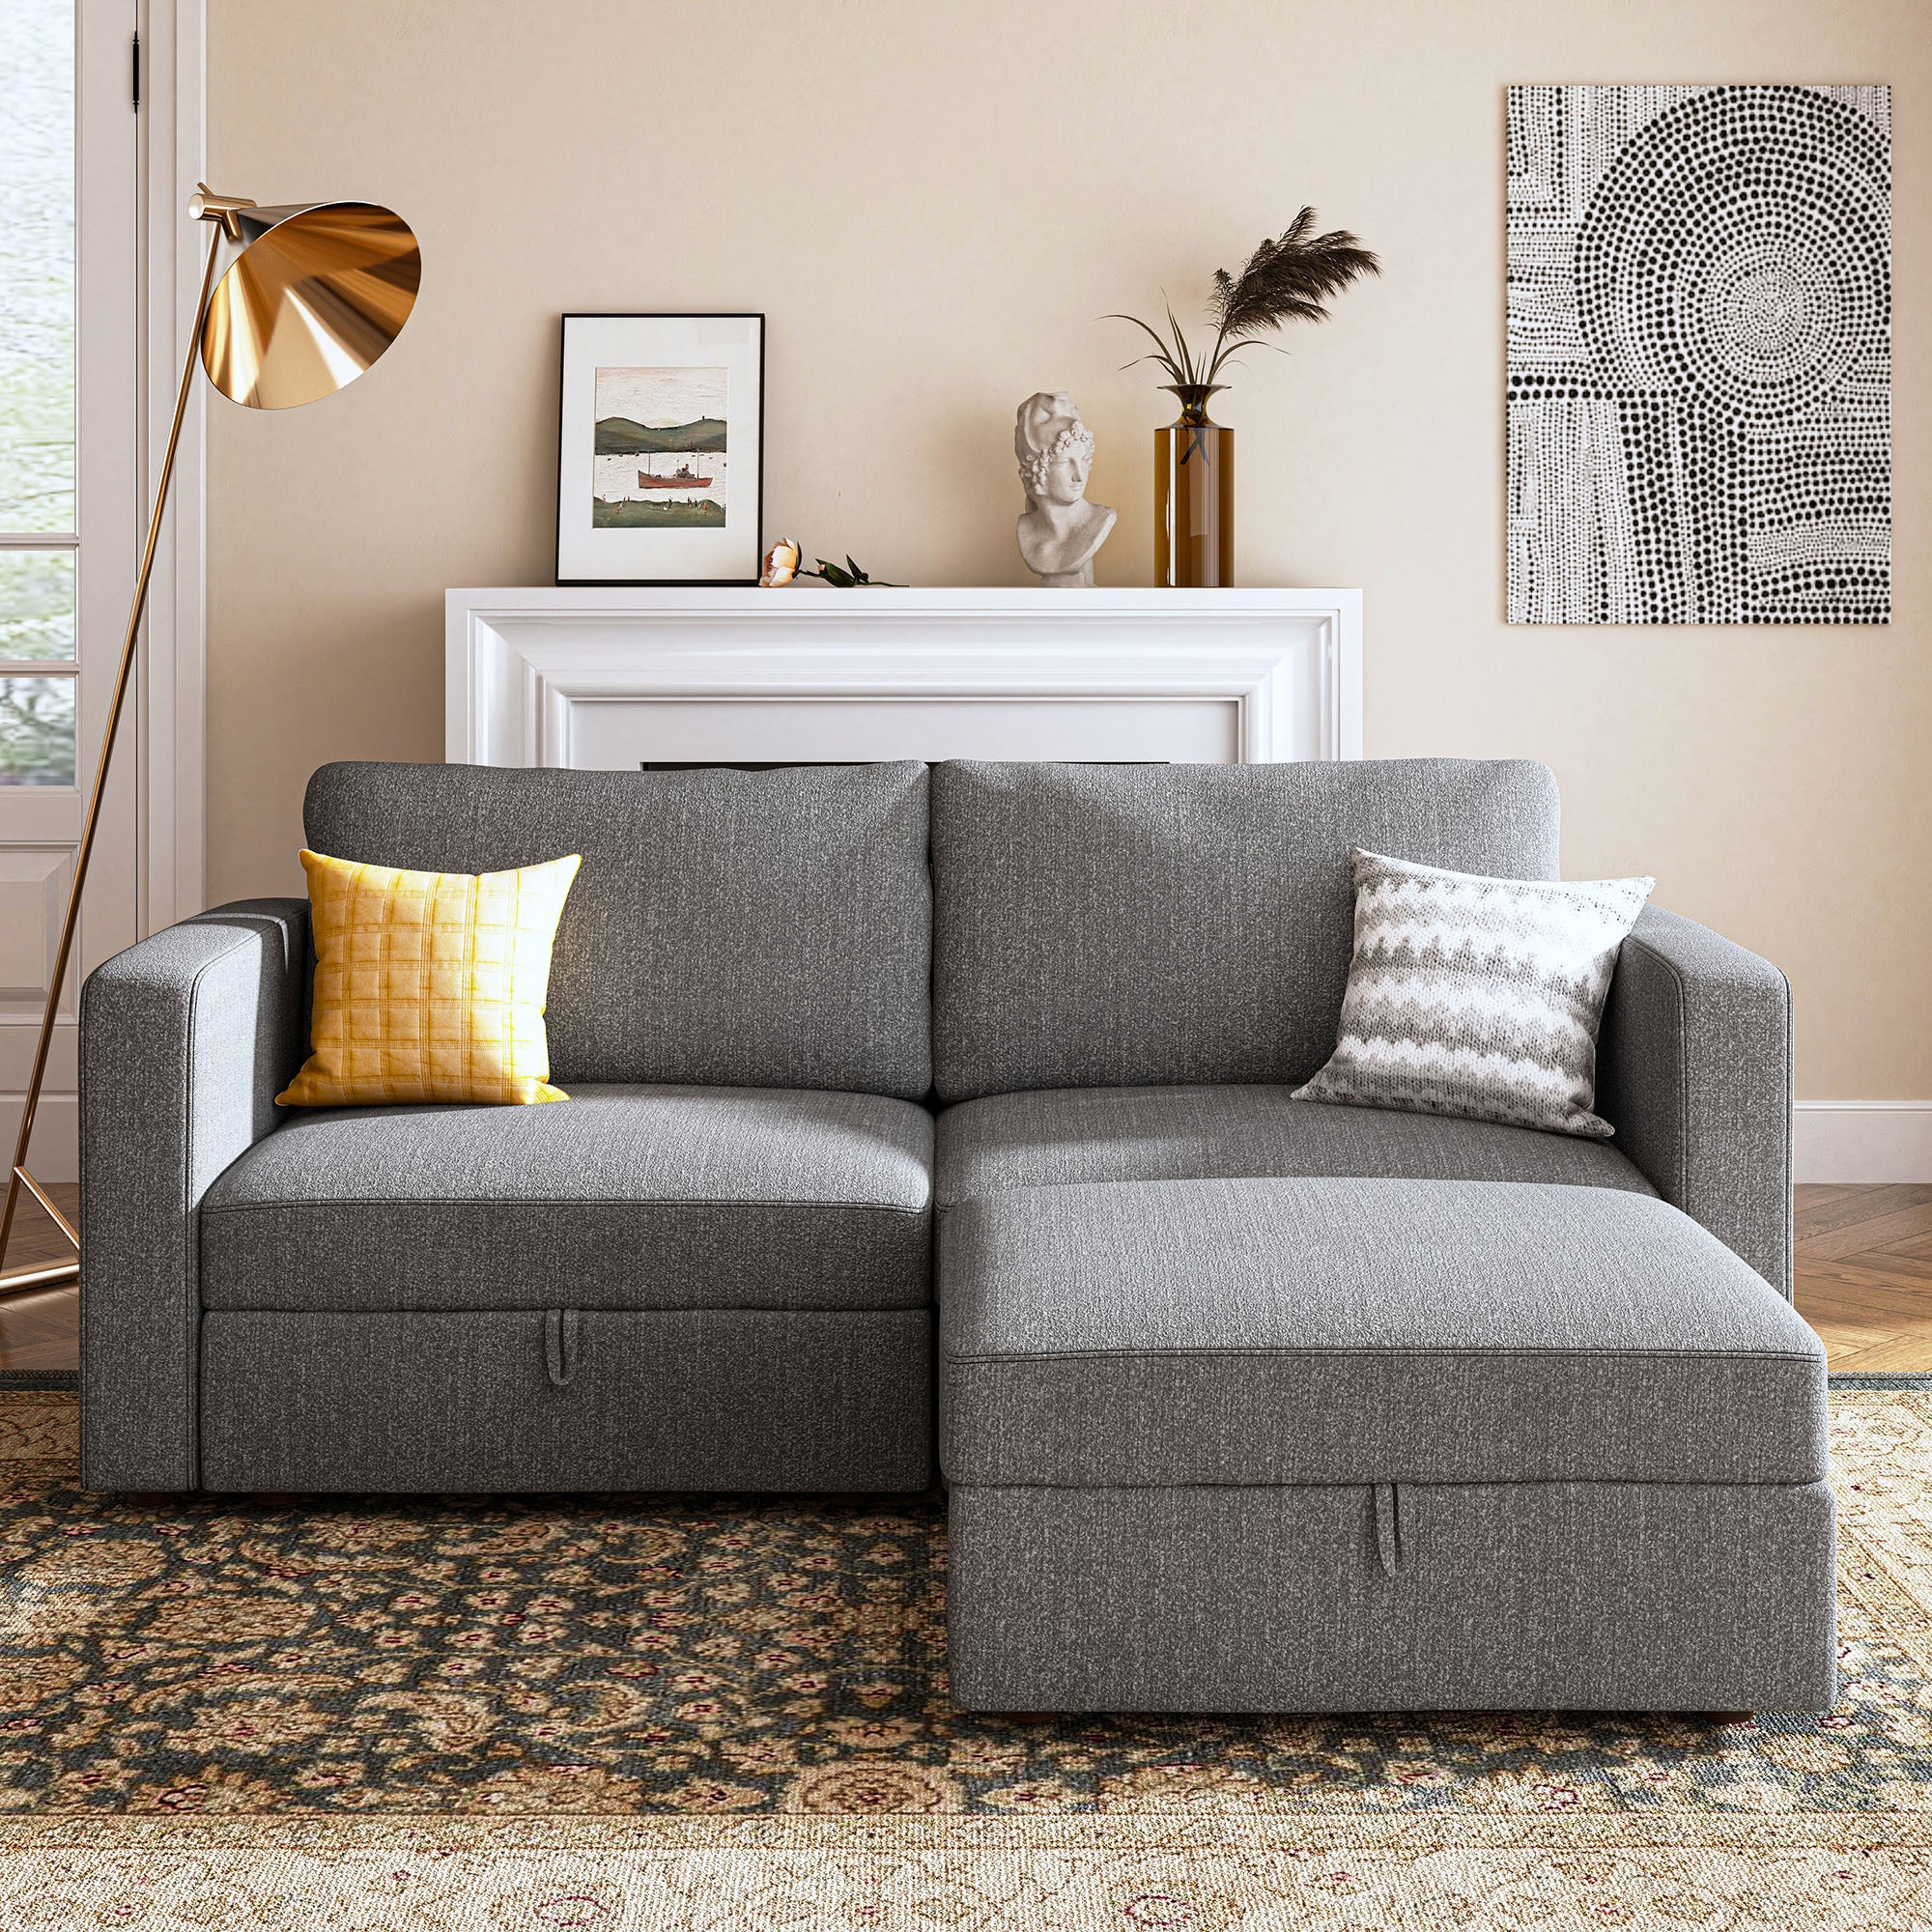 HONBAY Polyester Linen Grey L-shaped 2 Seaters Modular Sectional Sofa for Living Room